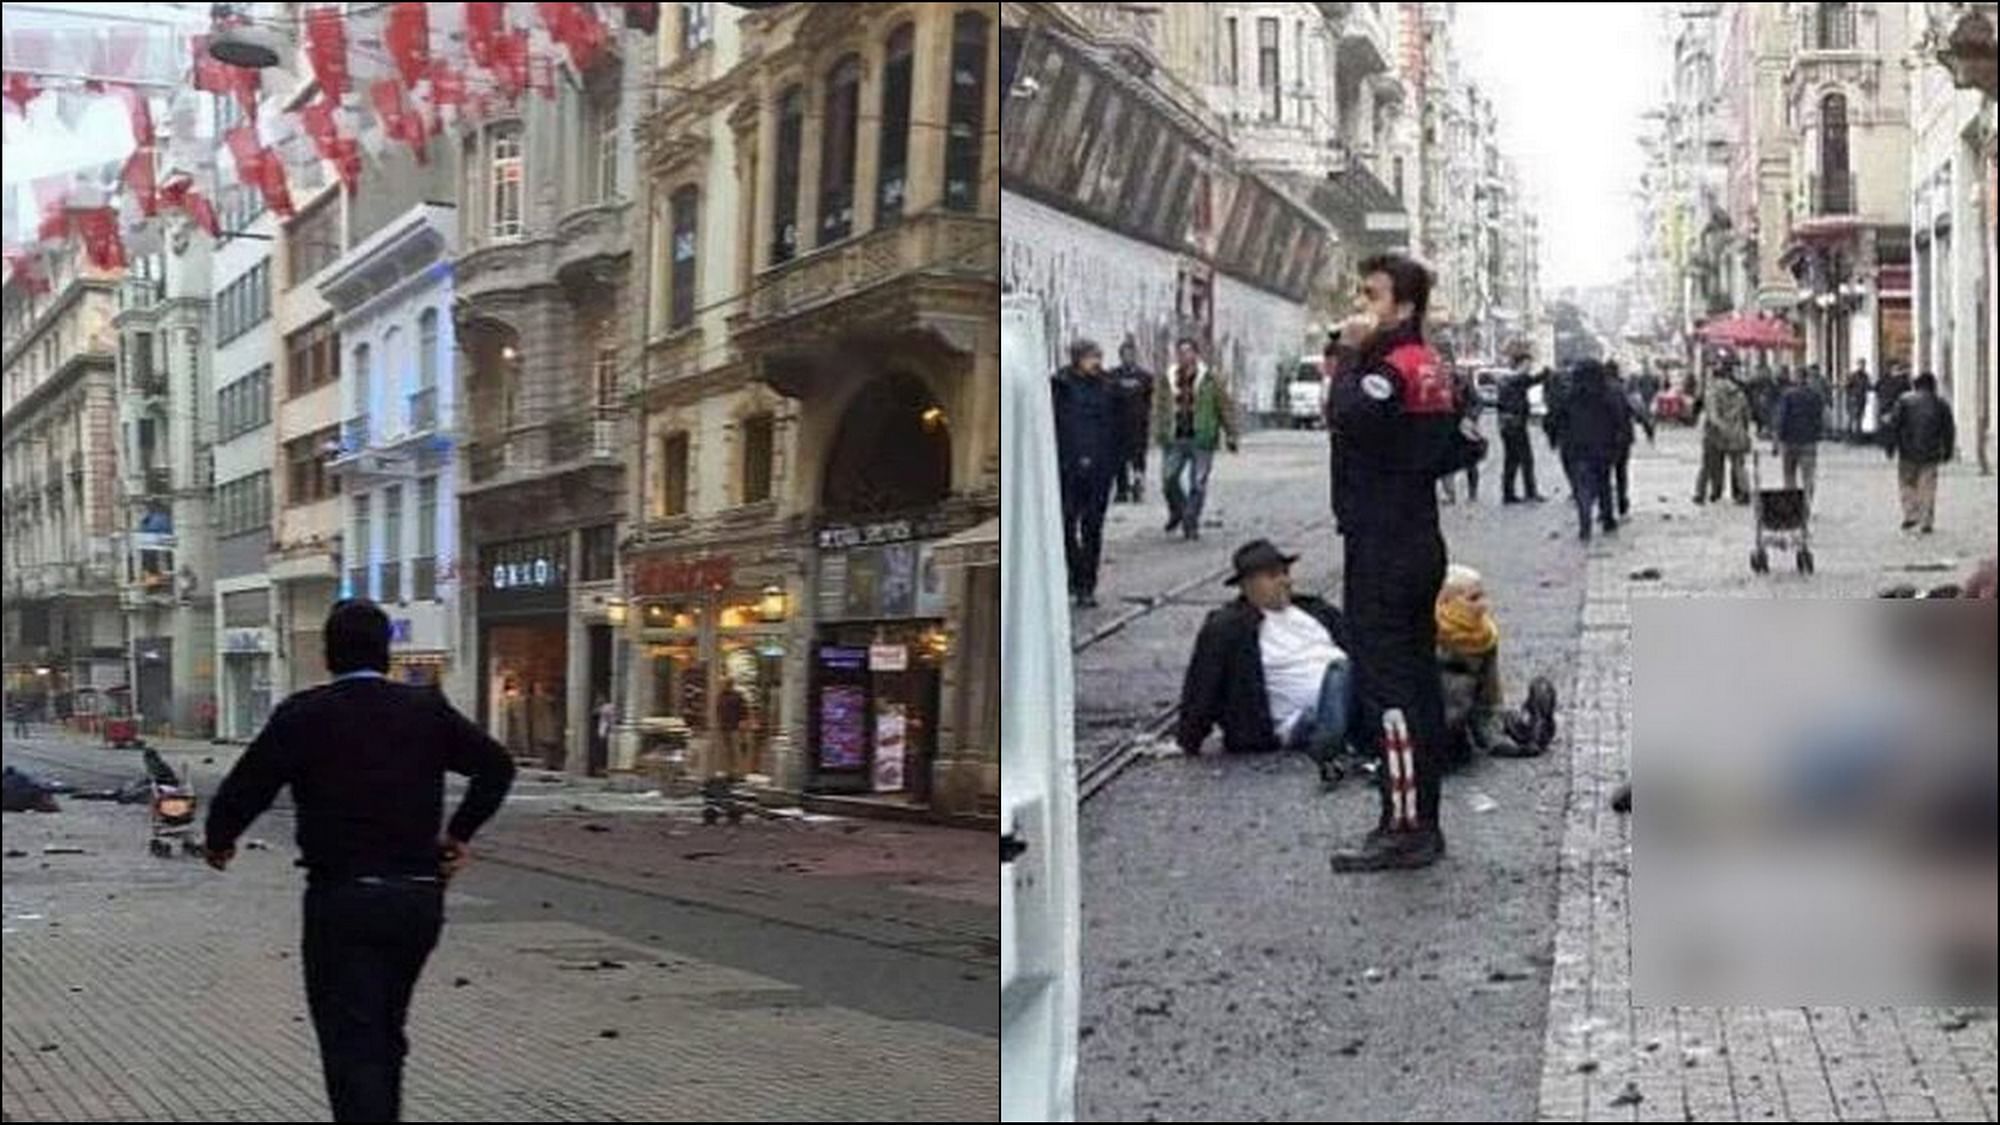 The blast site in Central Istanbul. (Photo Courtesy: <a href="https://twitter.com/belesbeyin_/status/711123331668418561">Beyin Bedava</a>)